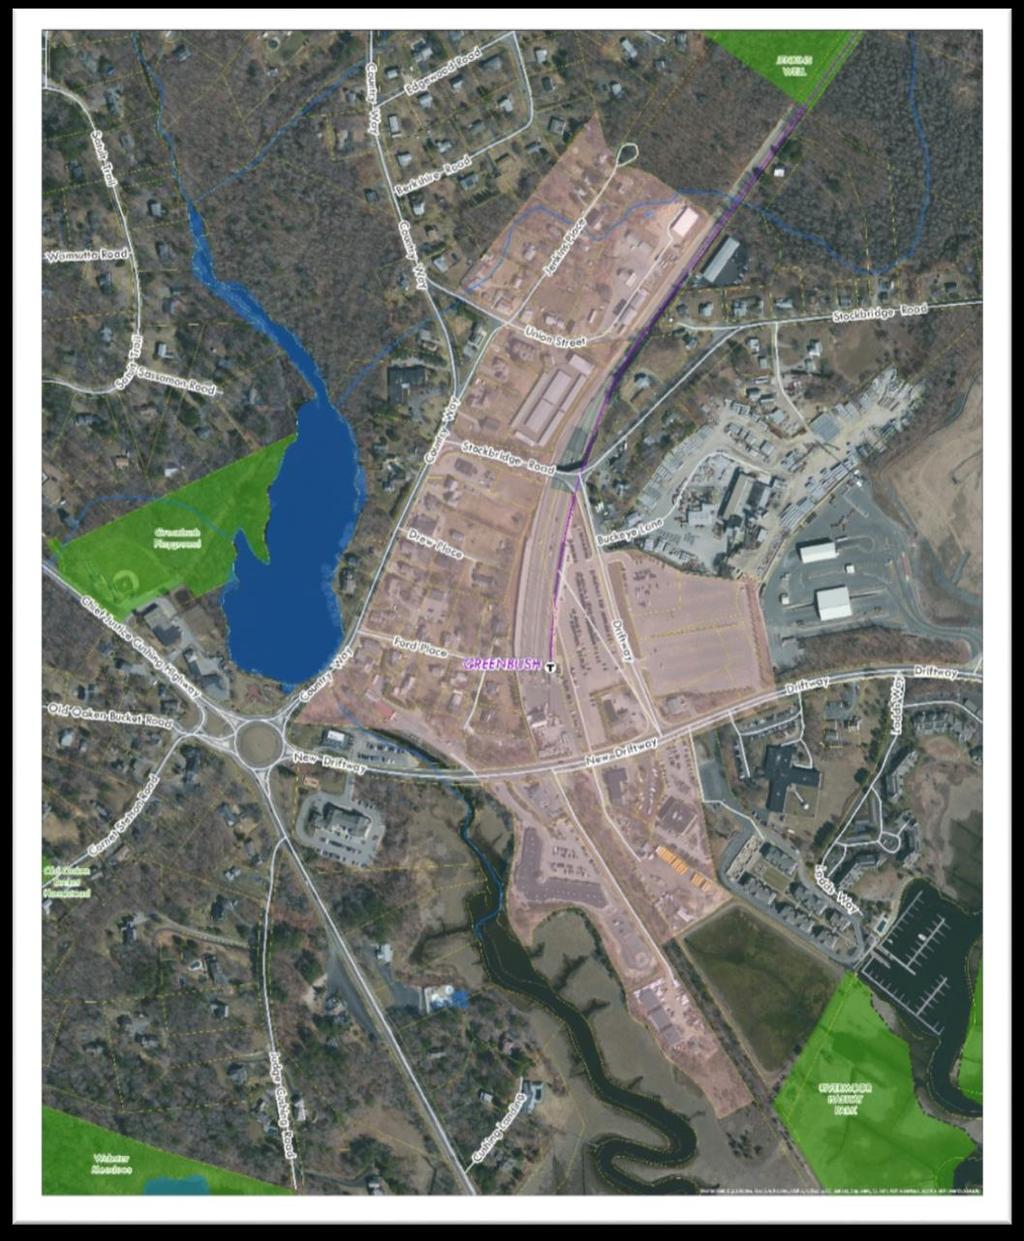 Greenbush Area Plan Encourage higher density mixed use along the Driftway Residential Multifamily Medium Density Mixed-use Neighborhood Higher Density Mixed-use, Transit- Oriented Village Center T